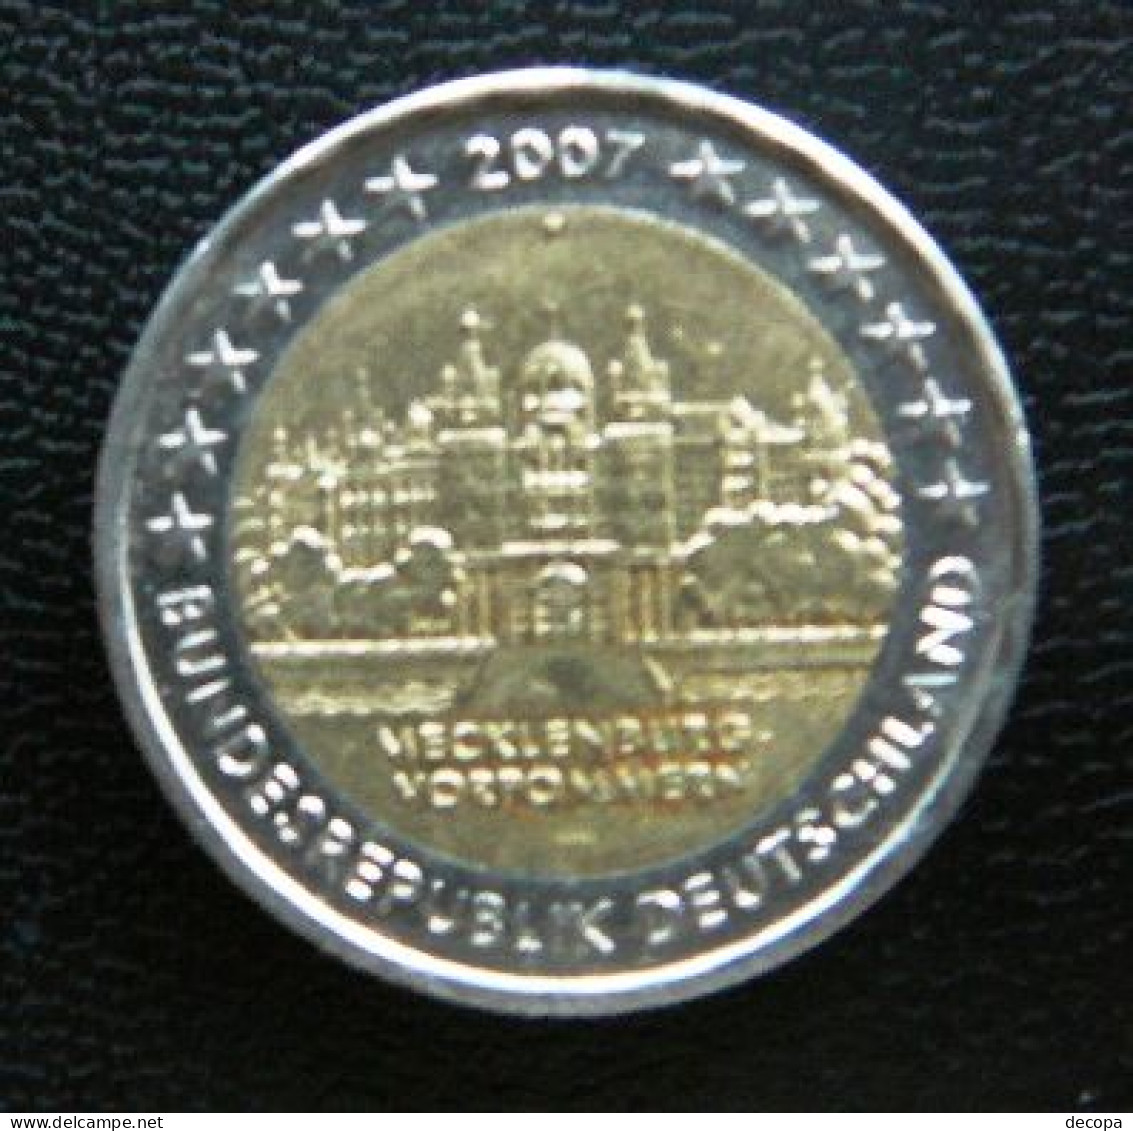 Germany - Allemagne - Duitsland   2 EURO 2007 F     Speciale Uitgave - Commemorative - Germany